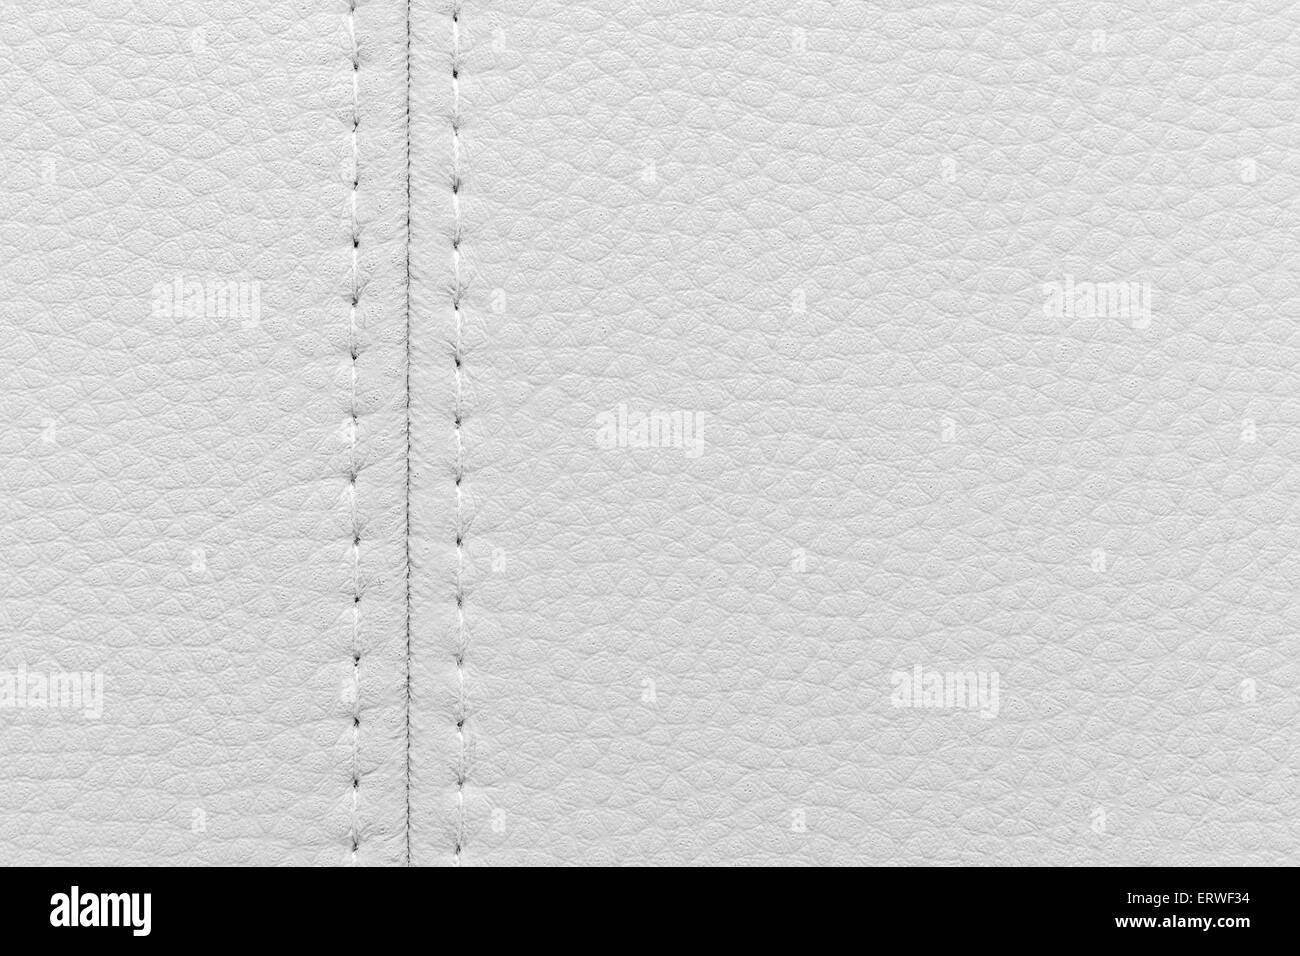 White Leather Textile In Vector Highly Textured Material With Visible  Grooves And Convexs Uneven Flat Soft Surface Upholstery Material For Sofas  And Armchairs Densely Compact Surface Composed Of Small Convex Cells Stock